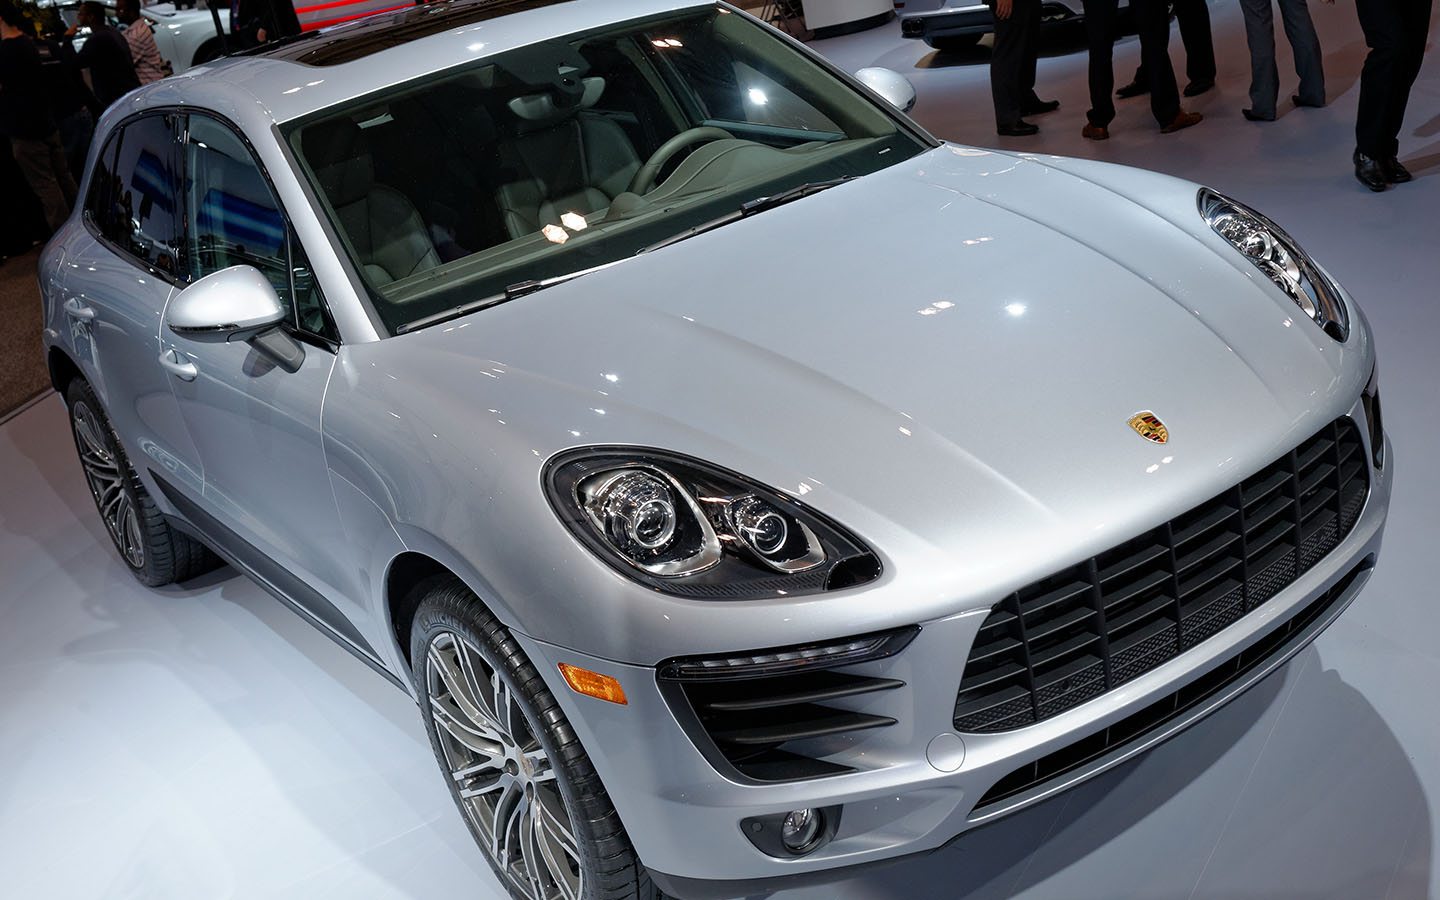 First generation of Porsche Macan was introduced in 2014